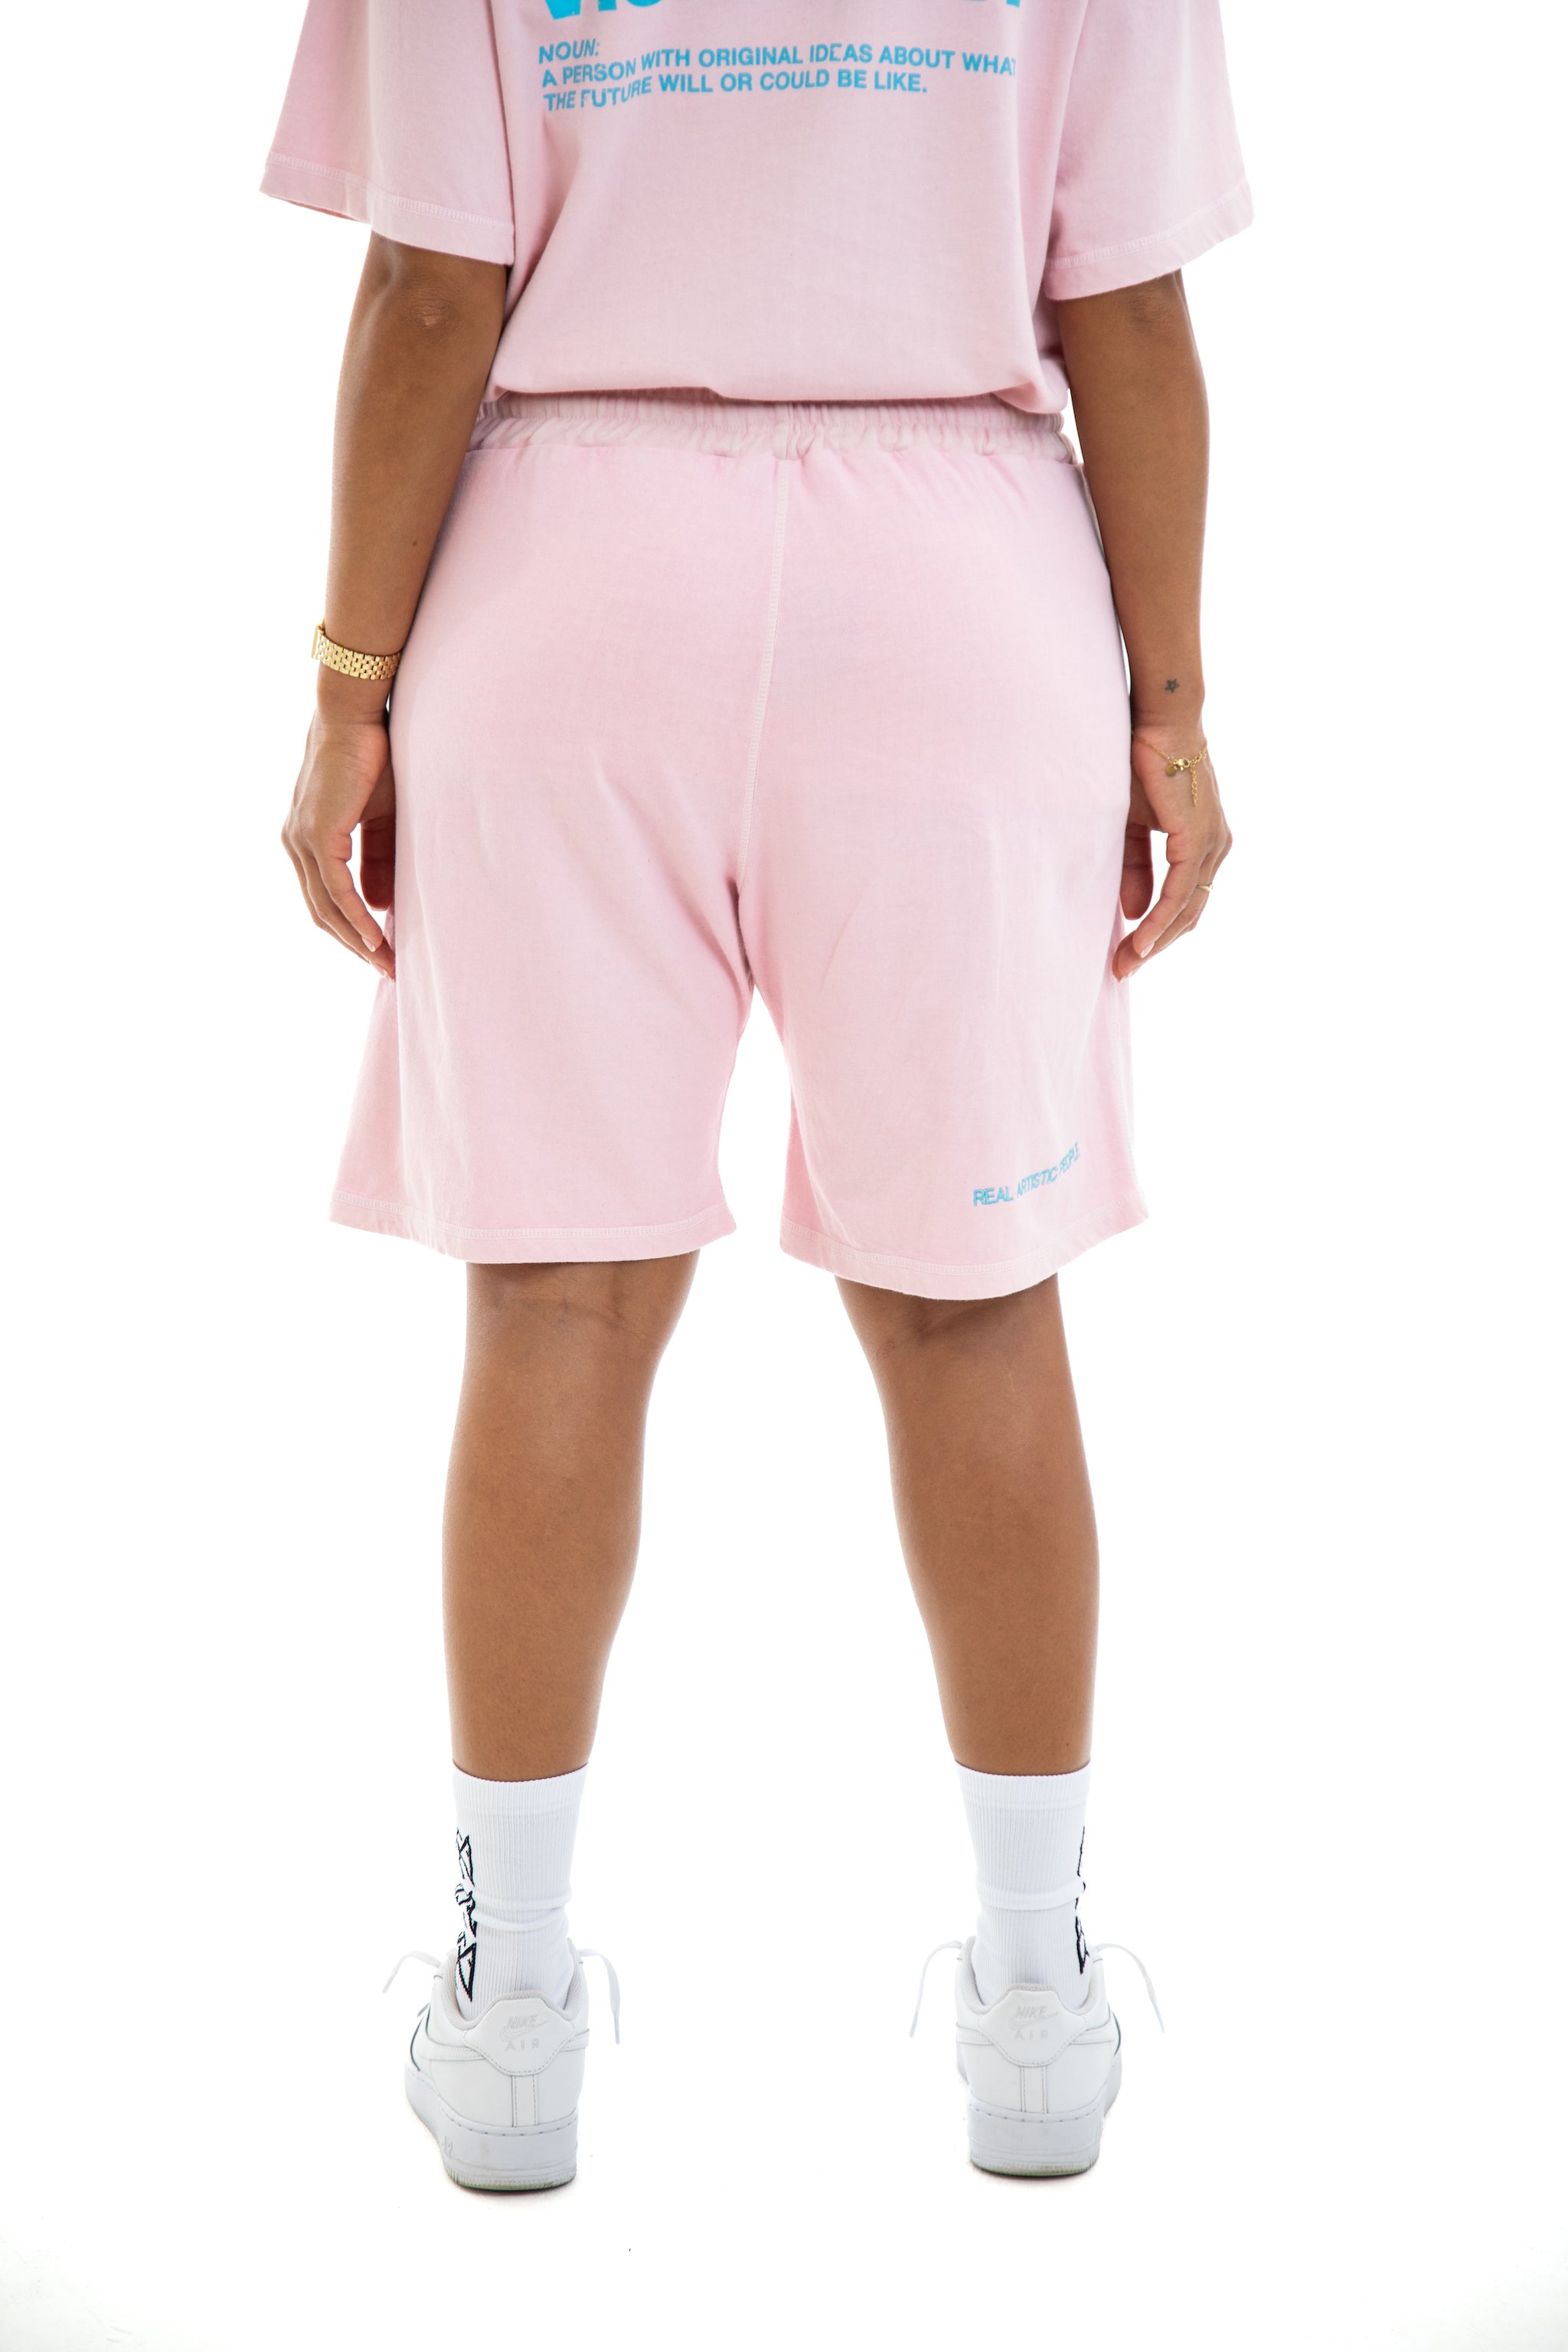 Heir Oversized Shorts Baby Pink - RealArtisticPeople